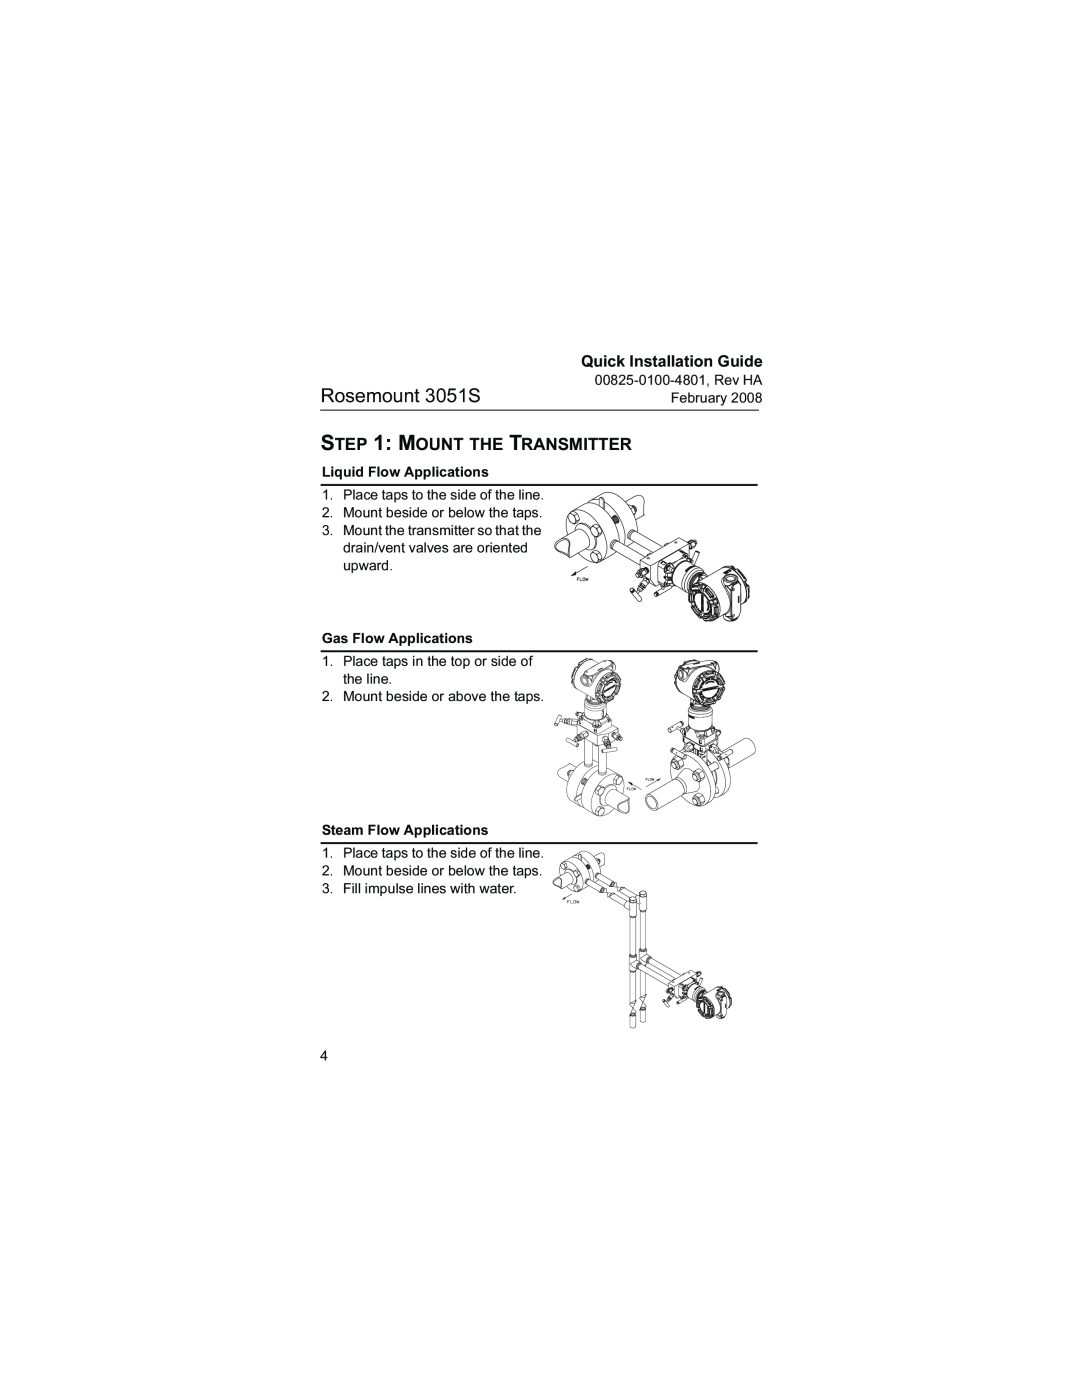 Emerson manual Mount The Transmitter, Rosemount 3051S, Quick Installation Guide 